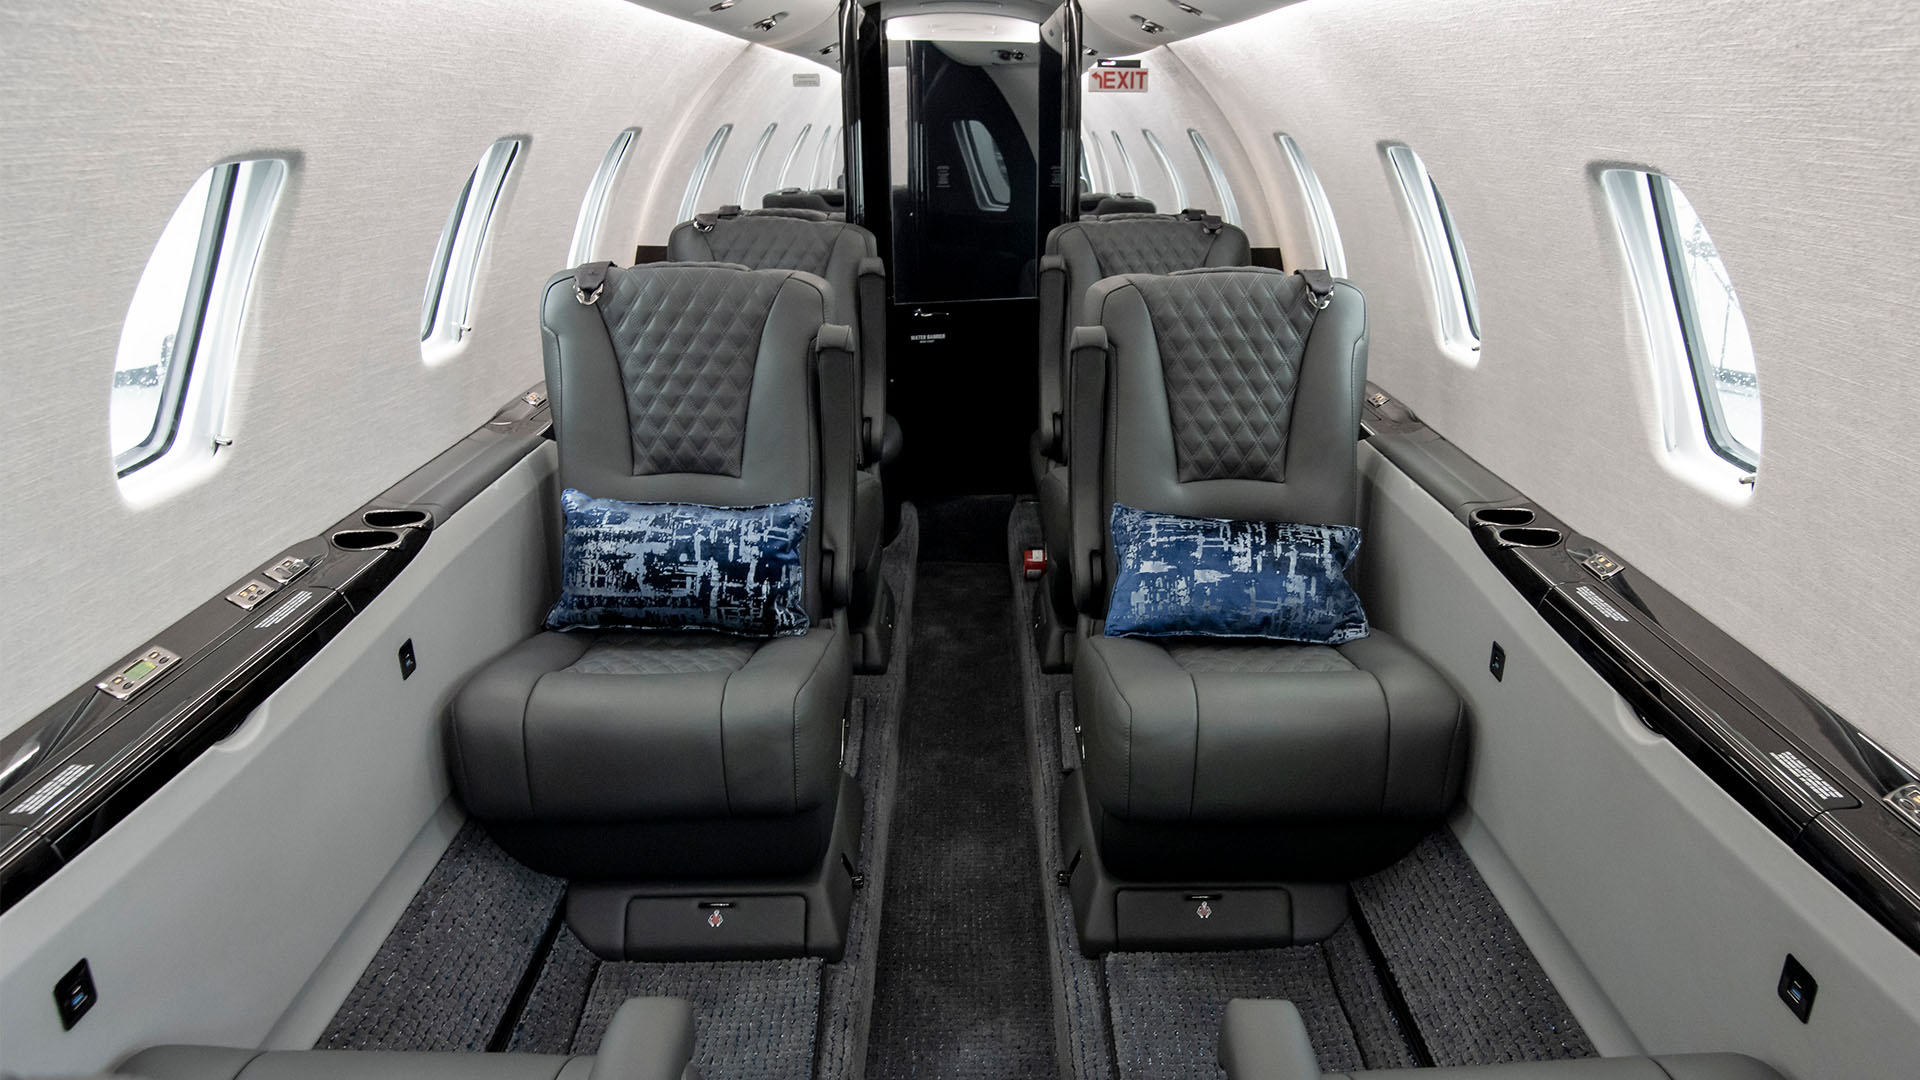 Example of refresh interior of a Citation XLS.